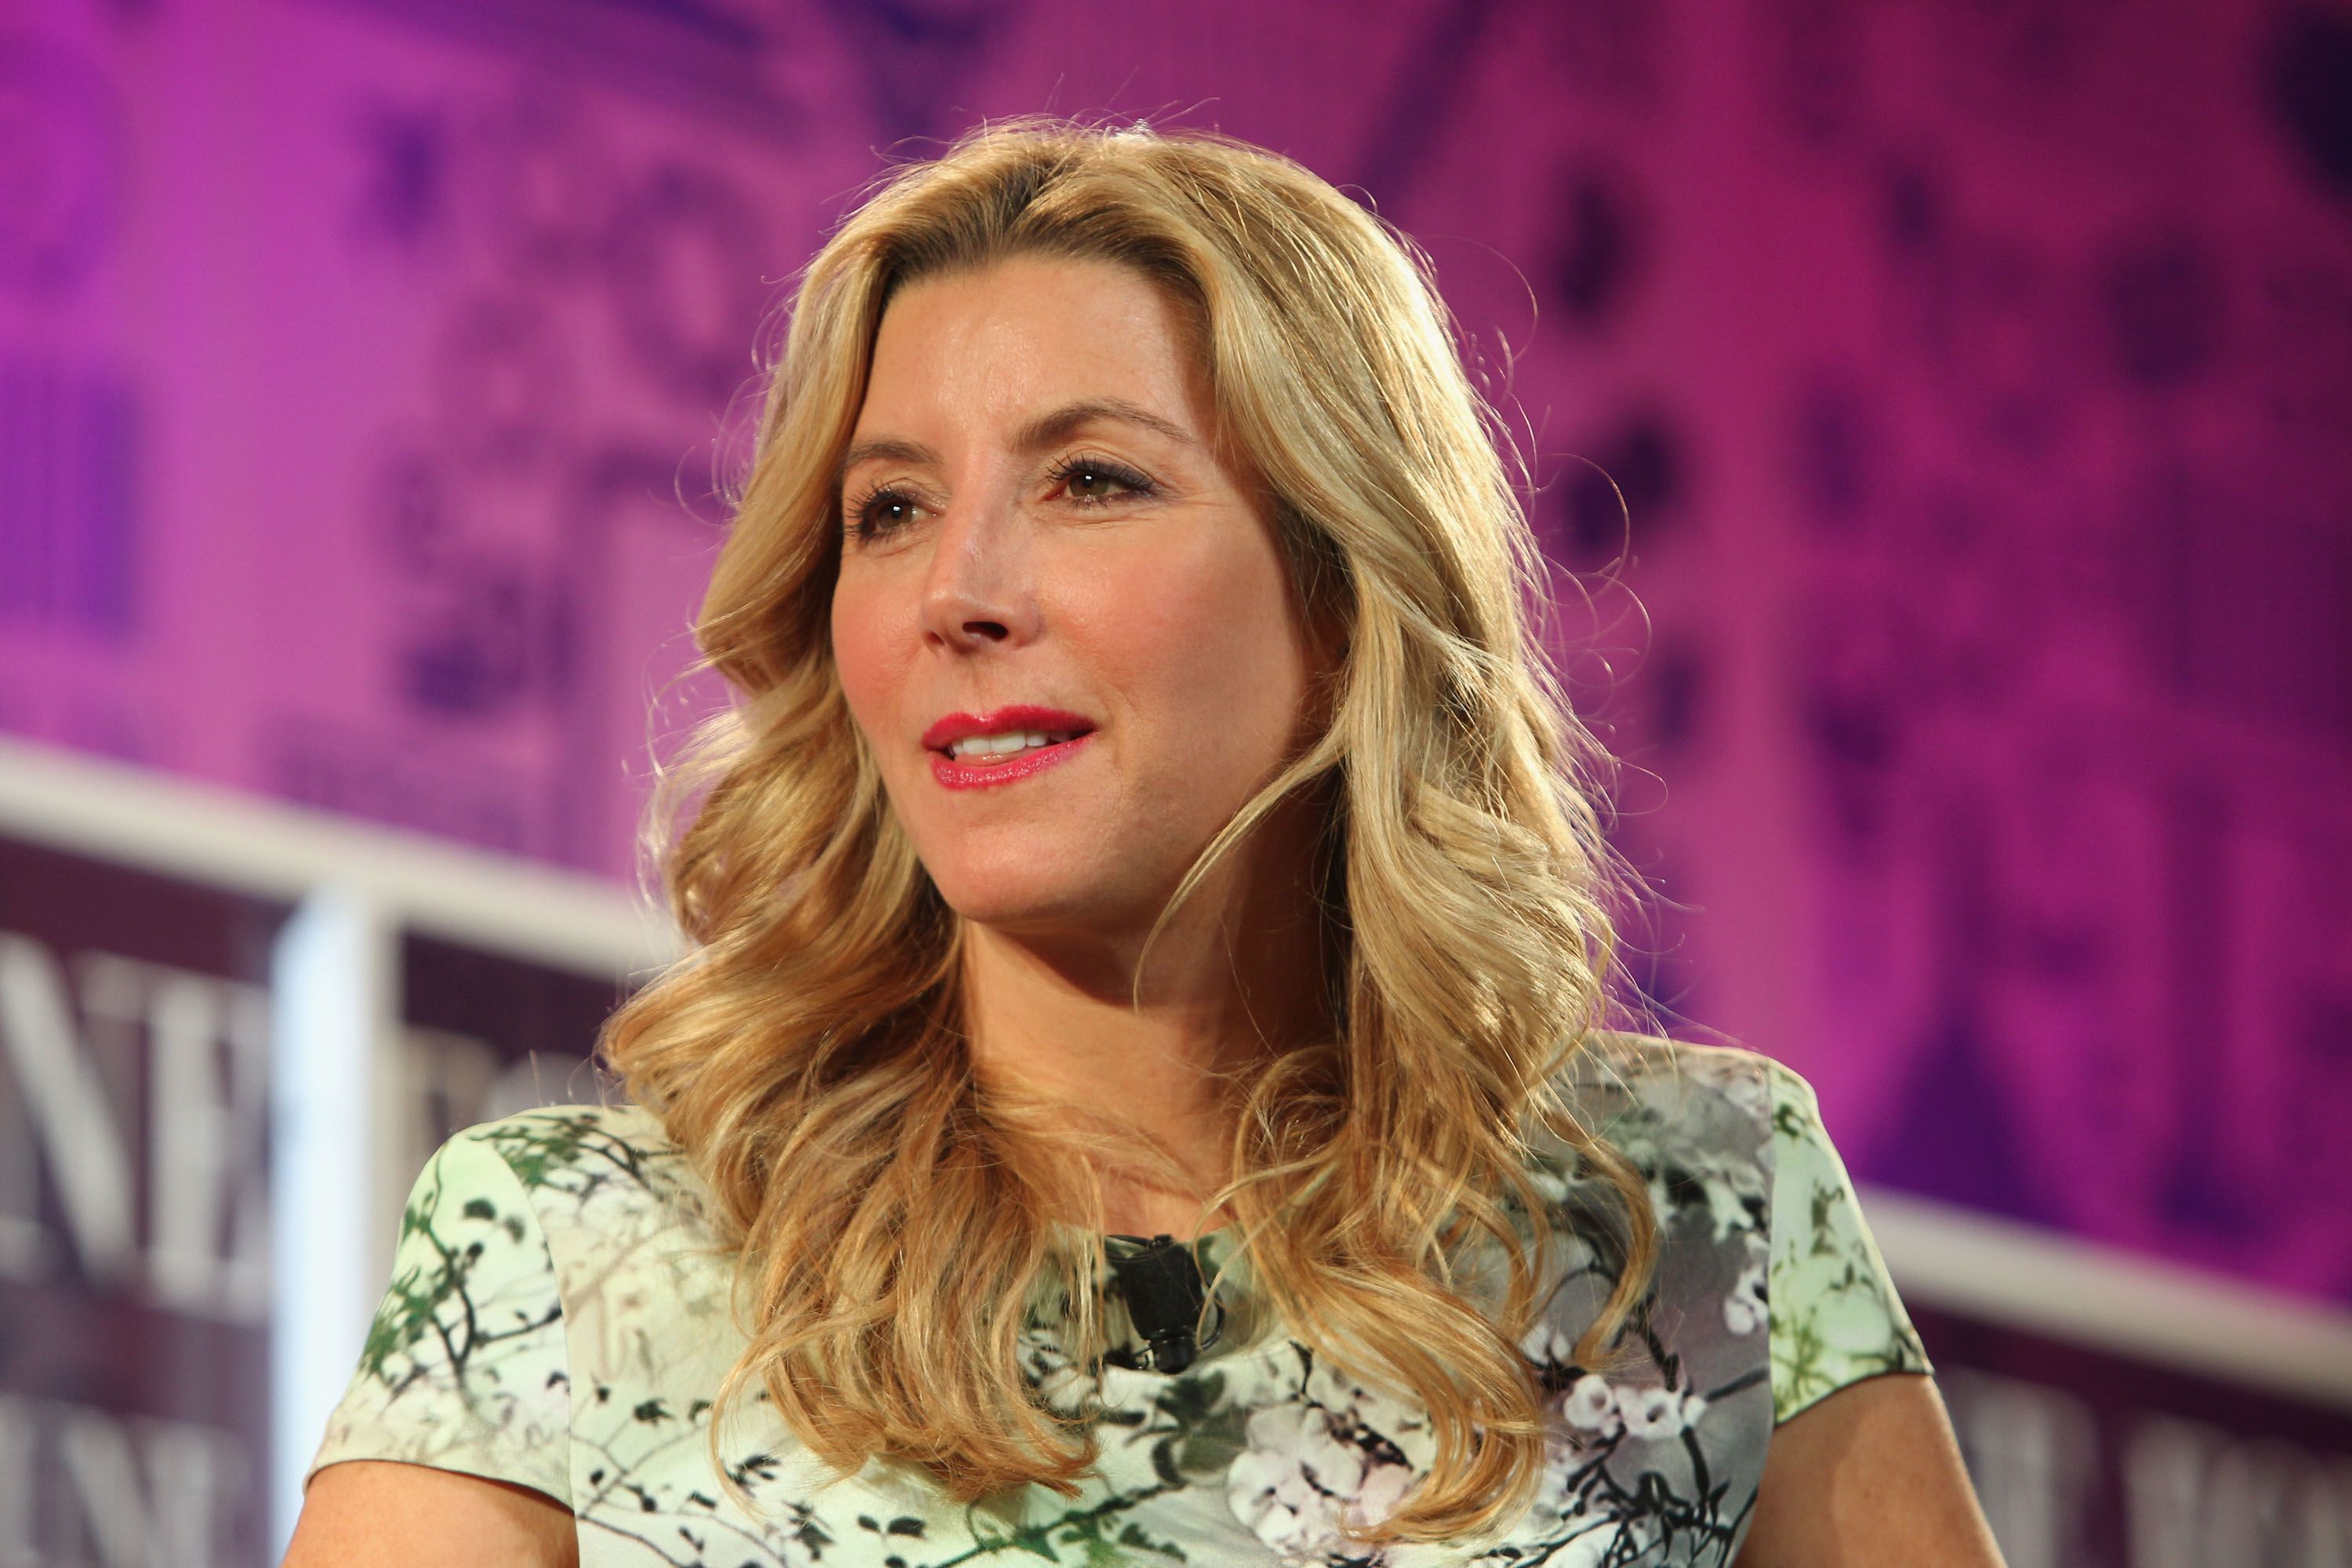 We chat live with SPANX founder and CEO Sara Blakely about arm tights